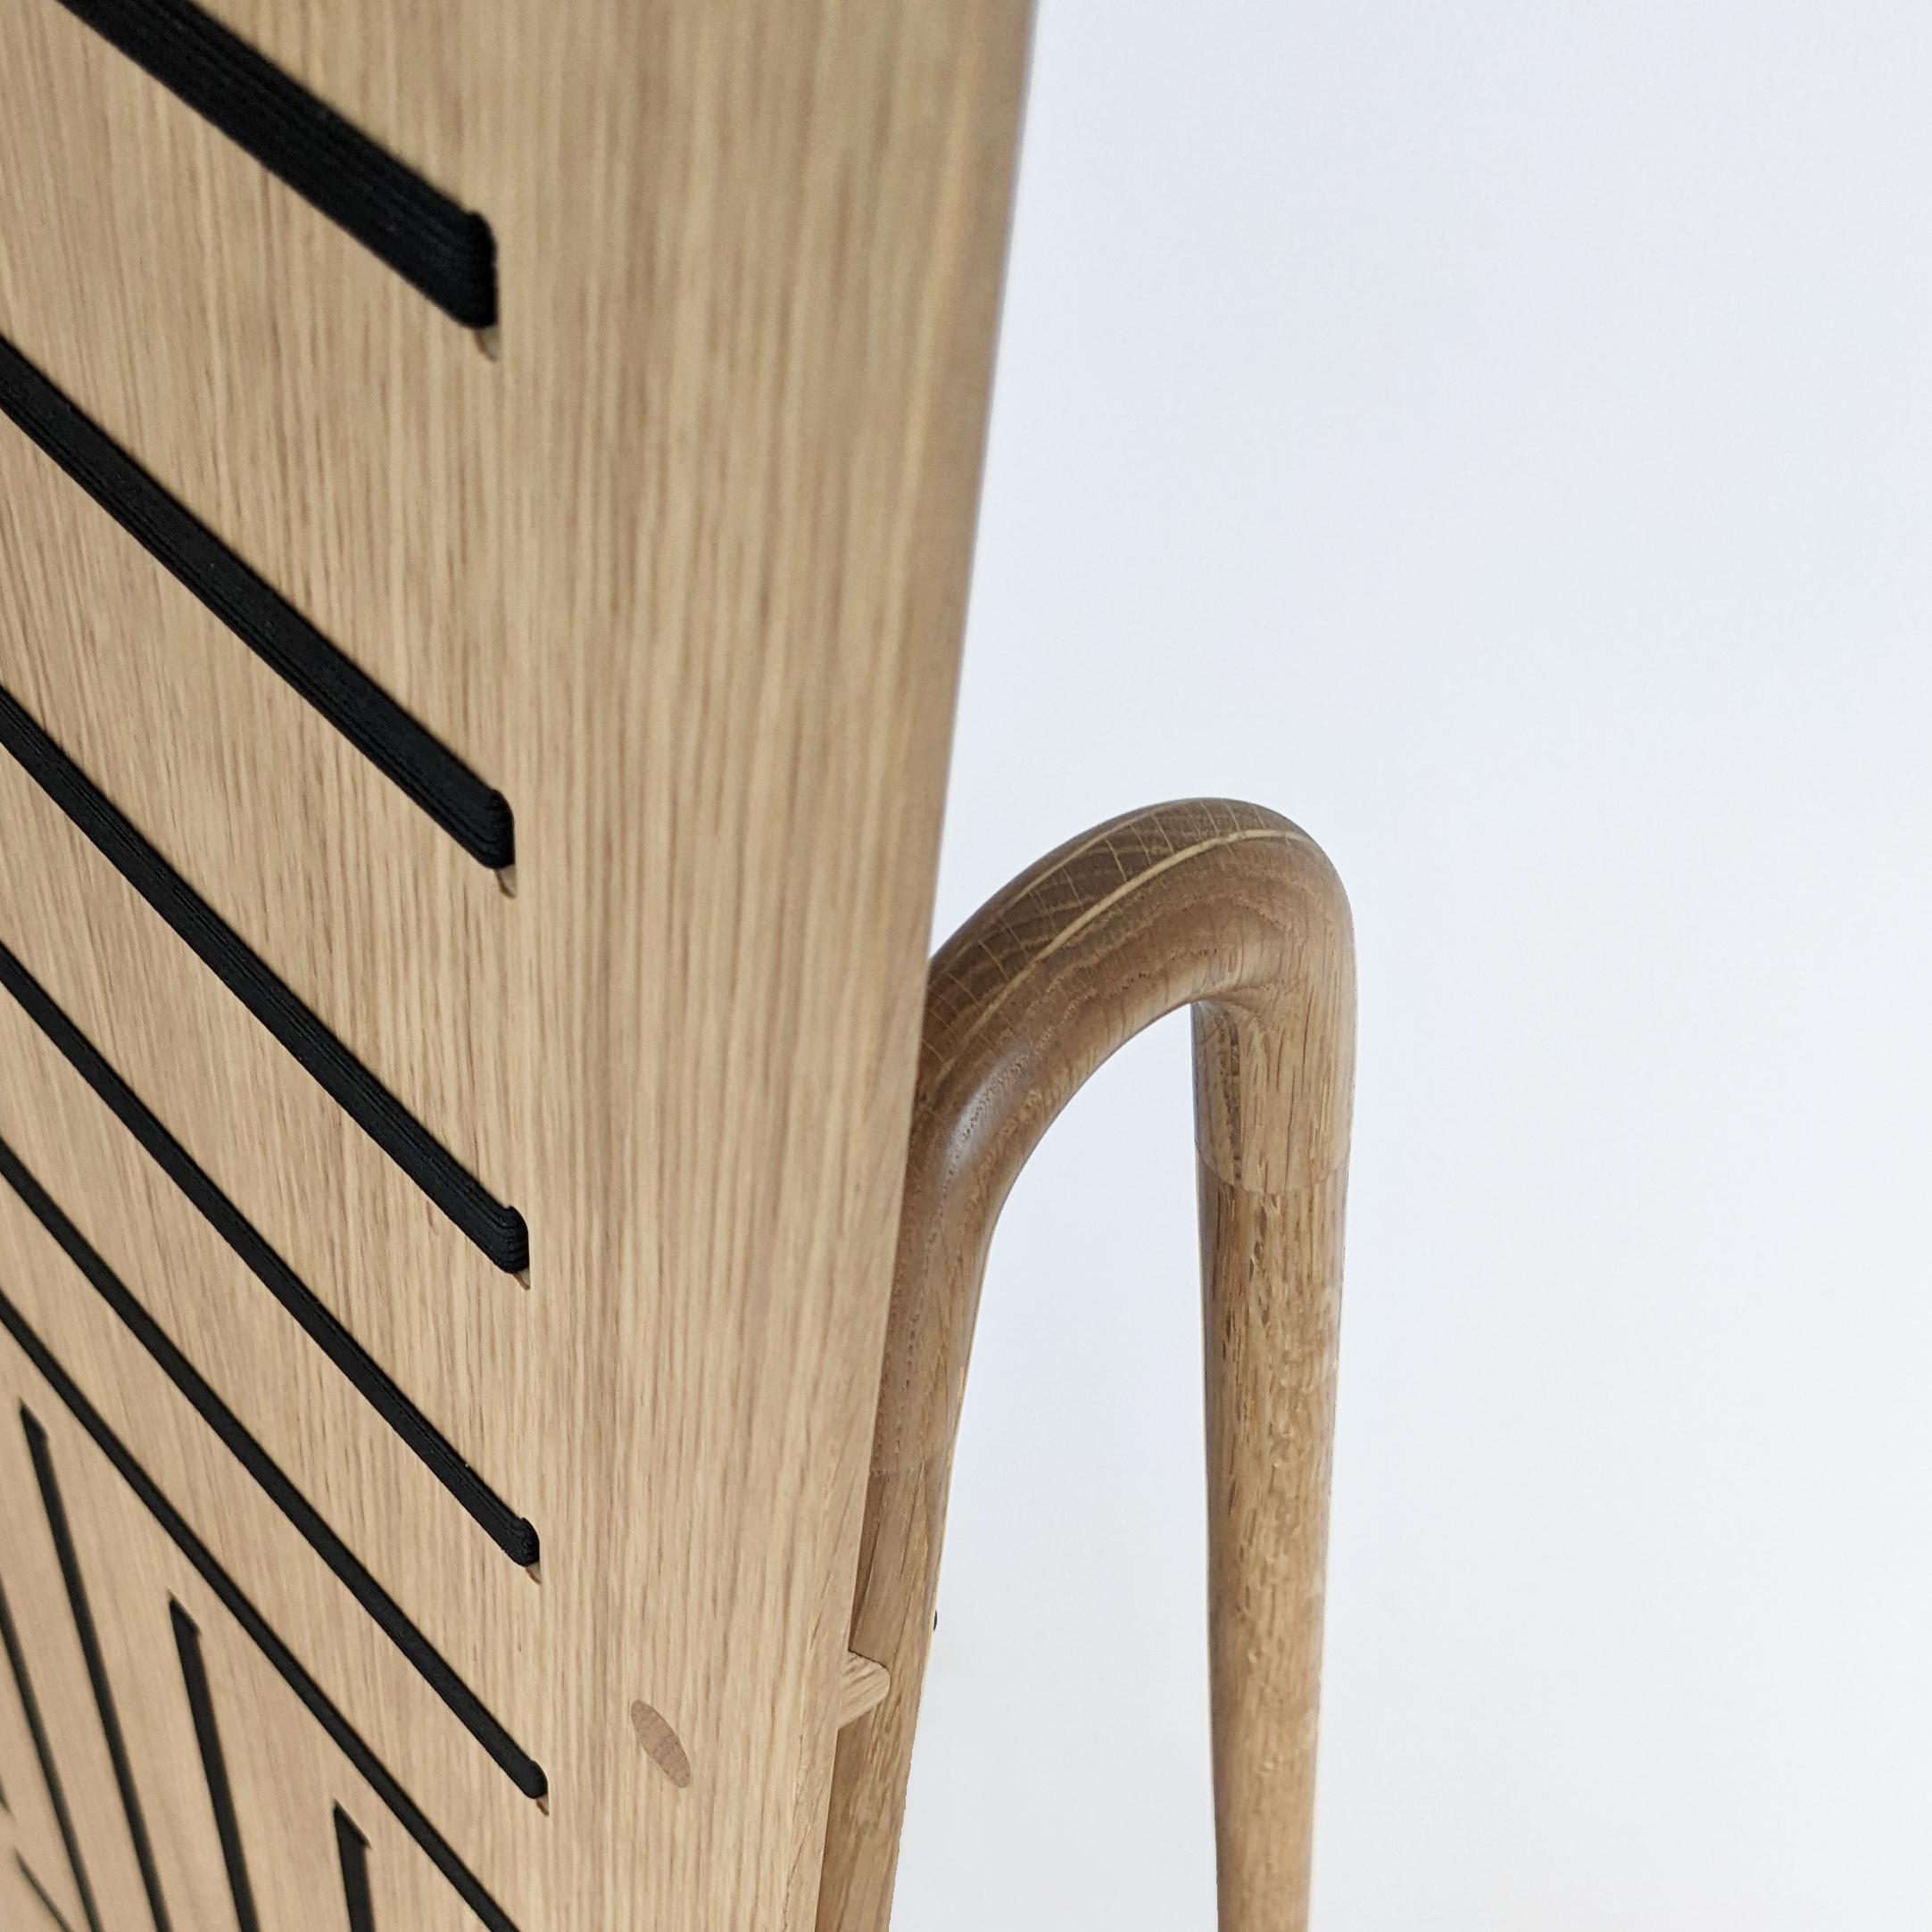 Oiled Strip Standing Wood, Display for Flat Objects by Lotti Gostic Studio For Sale